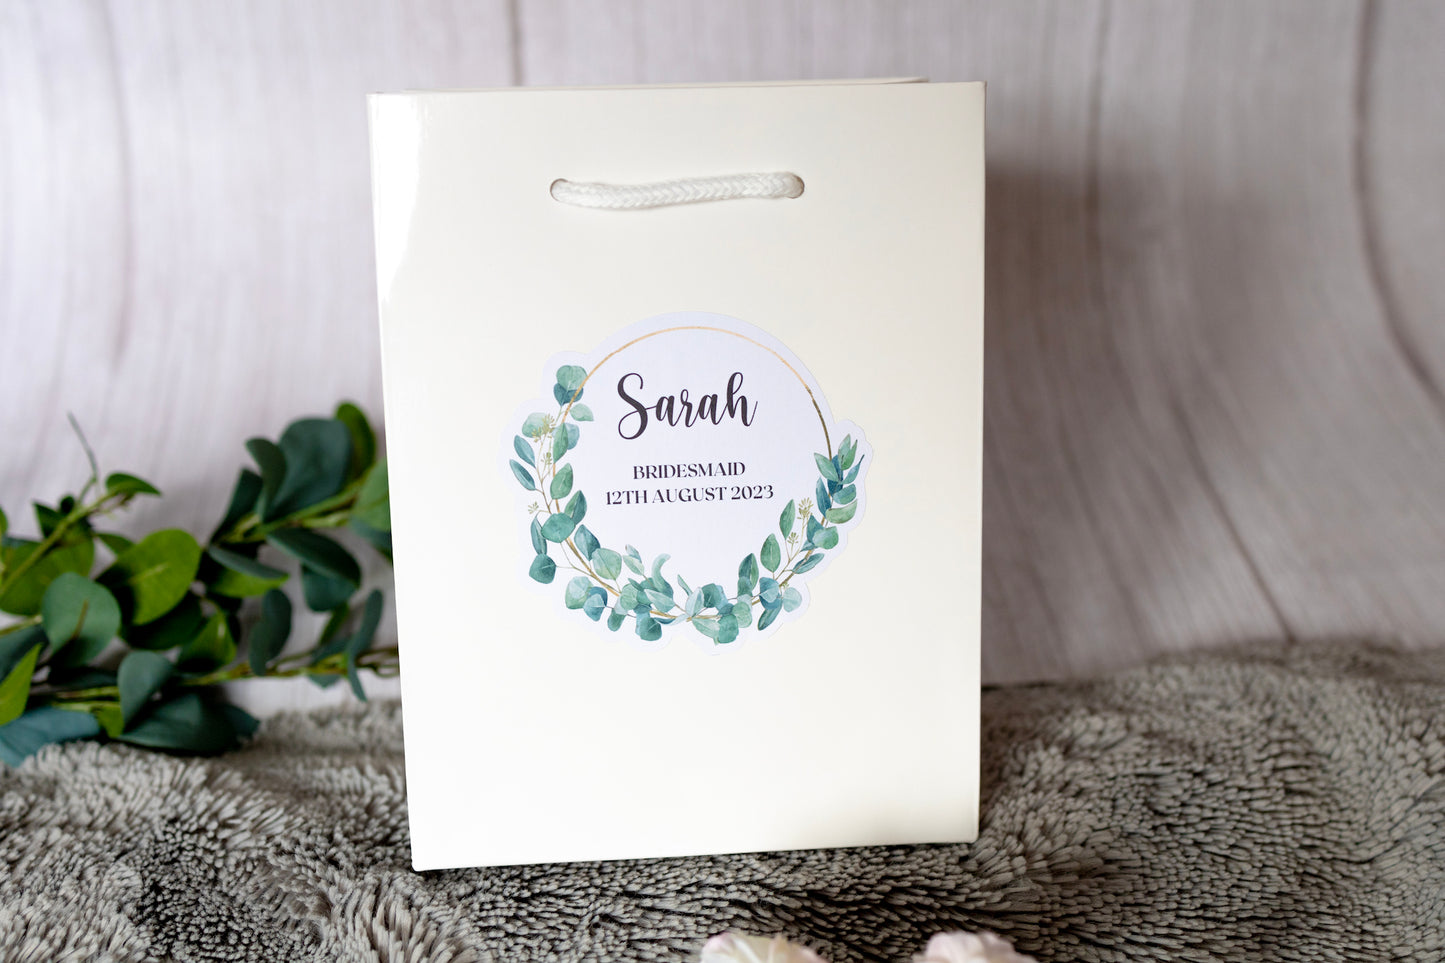 Personalised Bridesmaid Gift Bag, DIY Personalised Party Bag, Favour Bag, Eucalyptus Party Bags, Gift Wrapping, Gift Bags, Hen Party